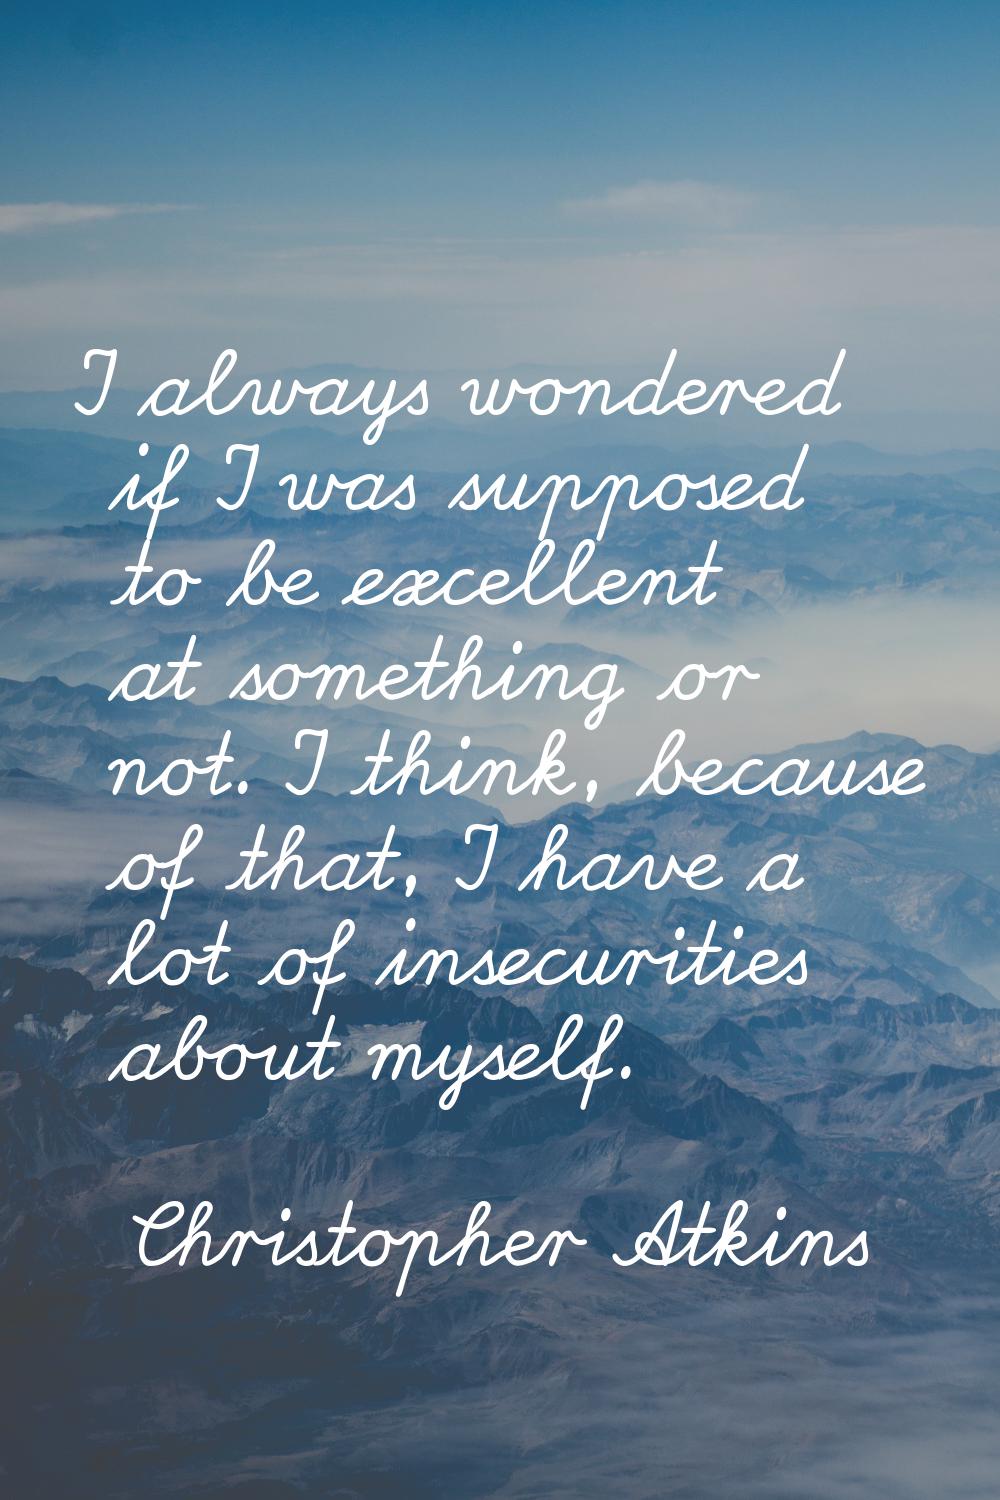 I always wondered if I was supposed to be excellent at something or not. I think, because of that, 